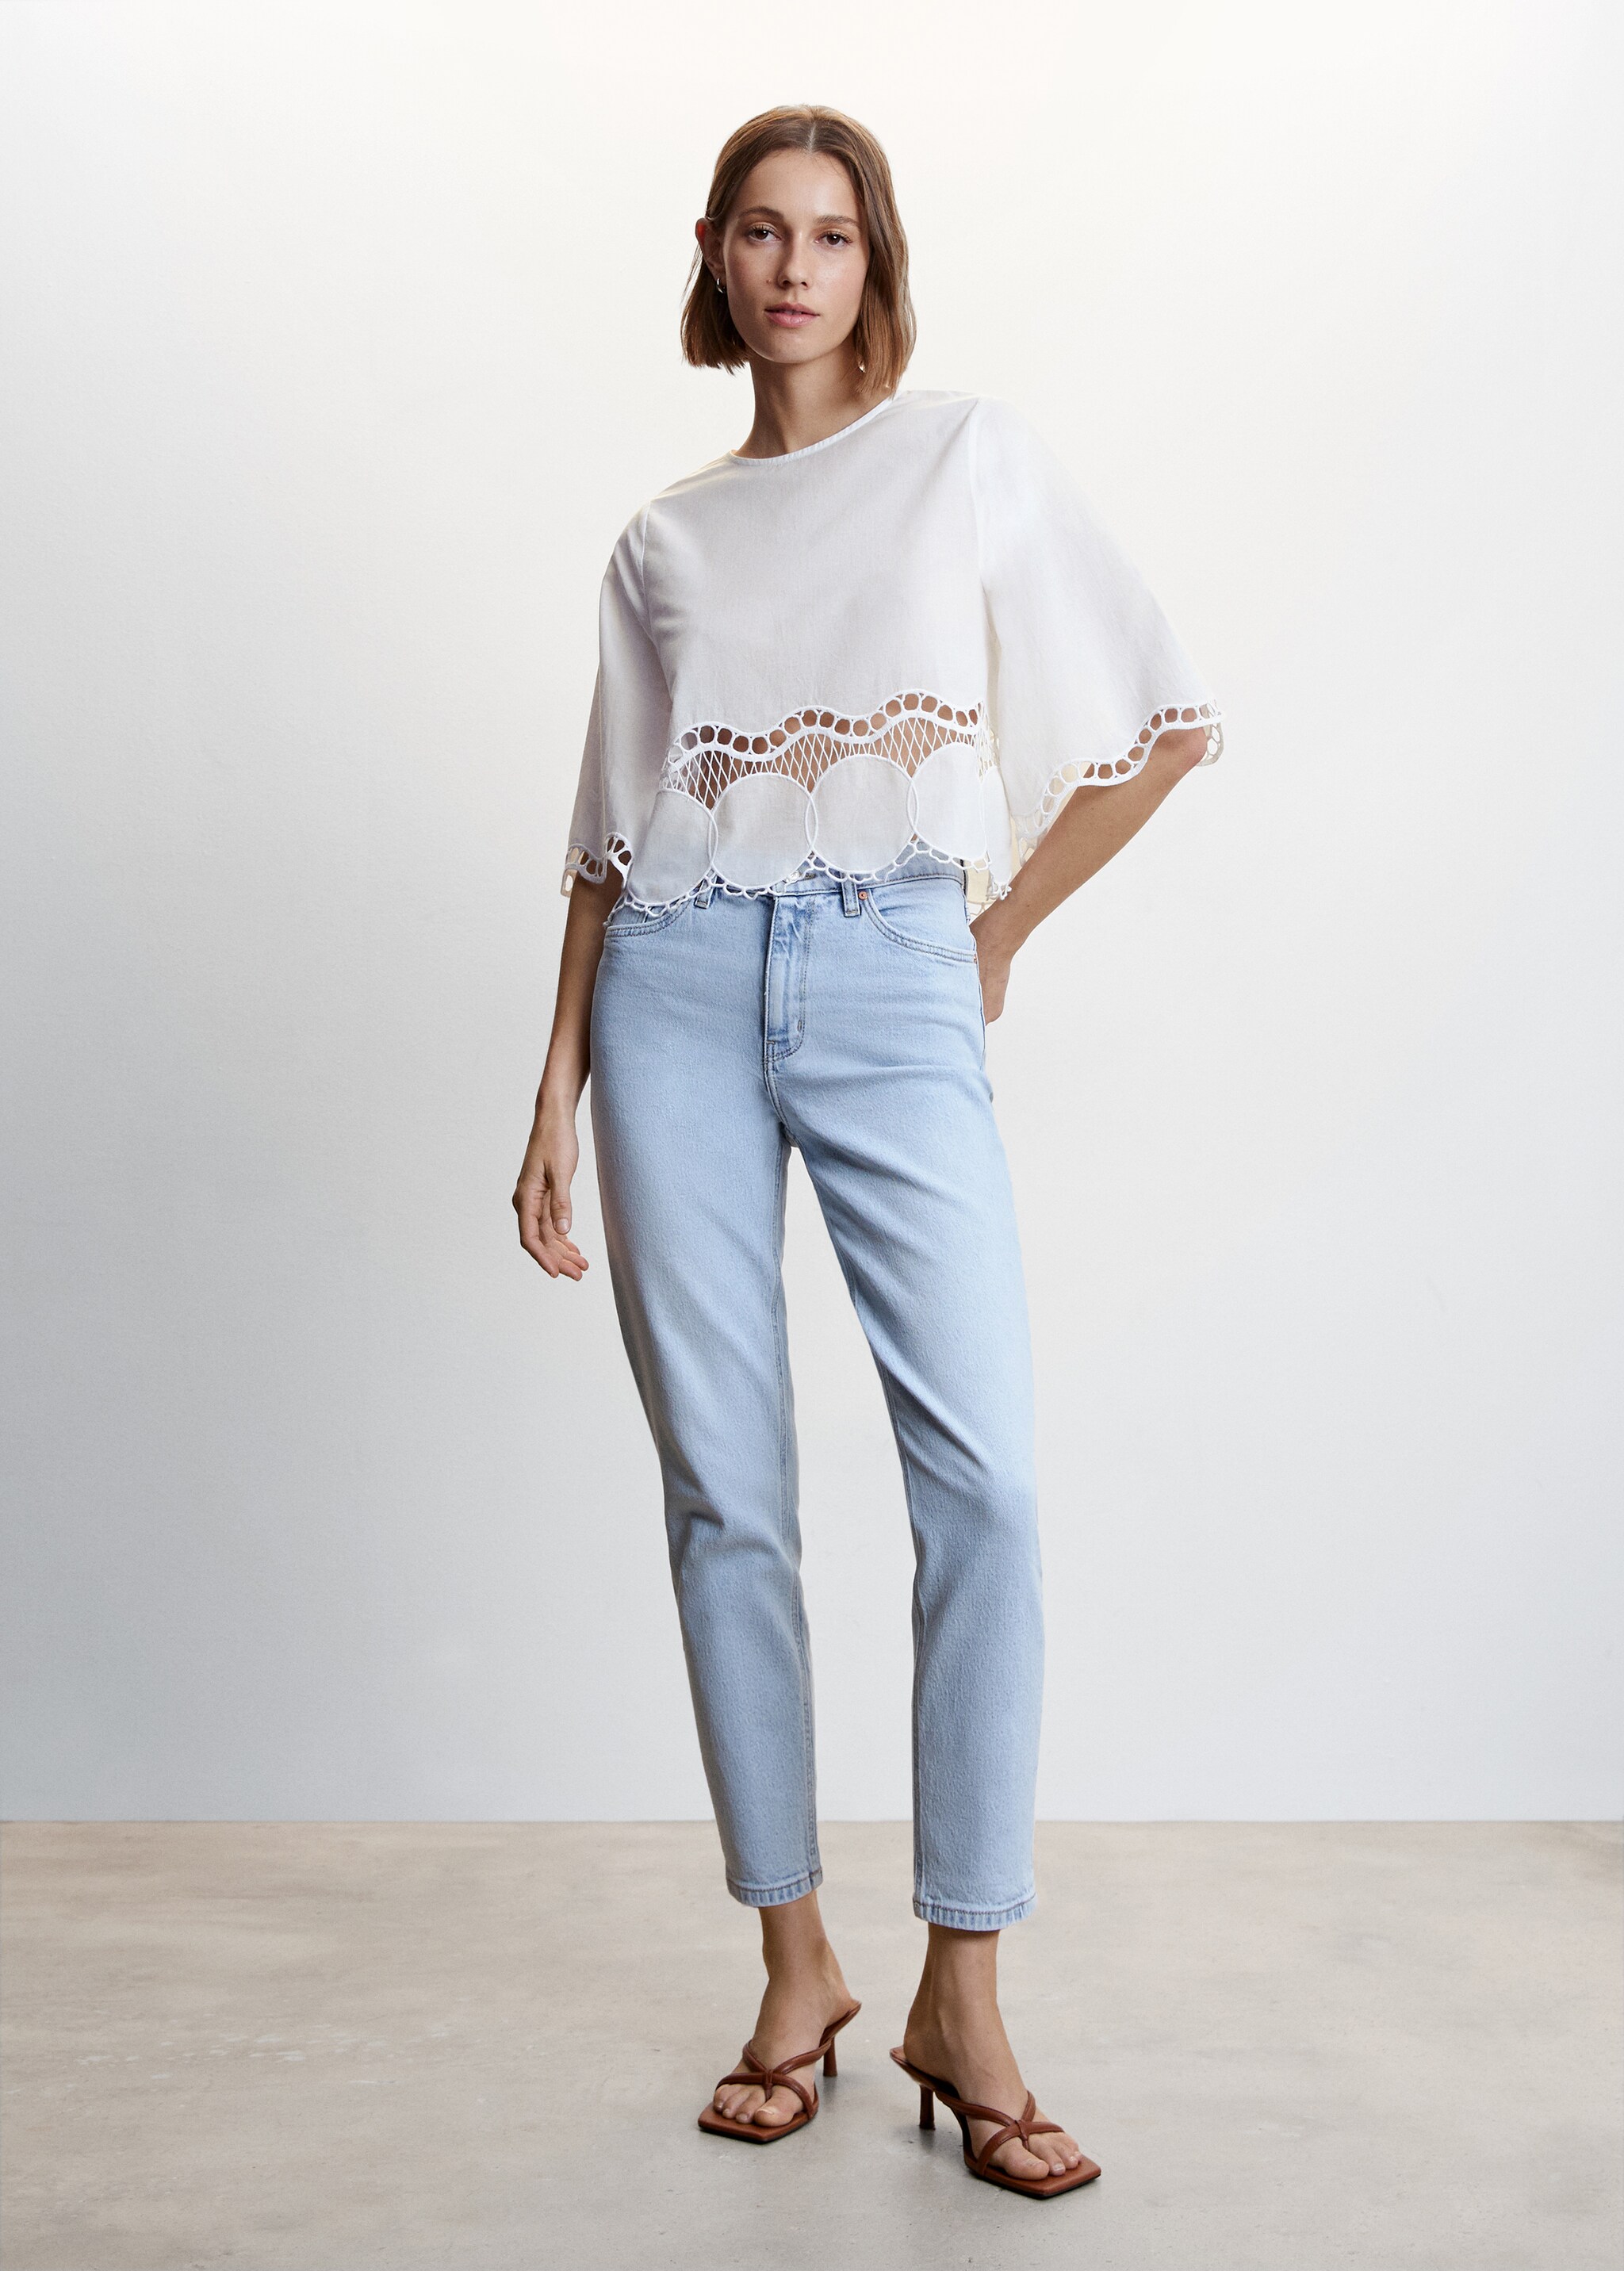 Embroidered oversized blouse - General plane